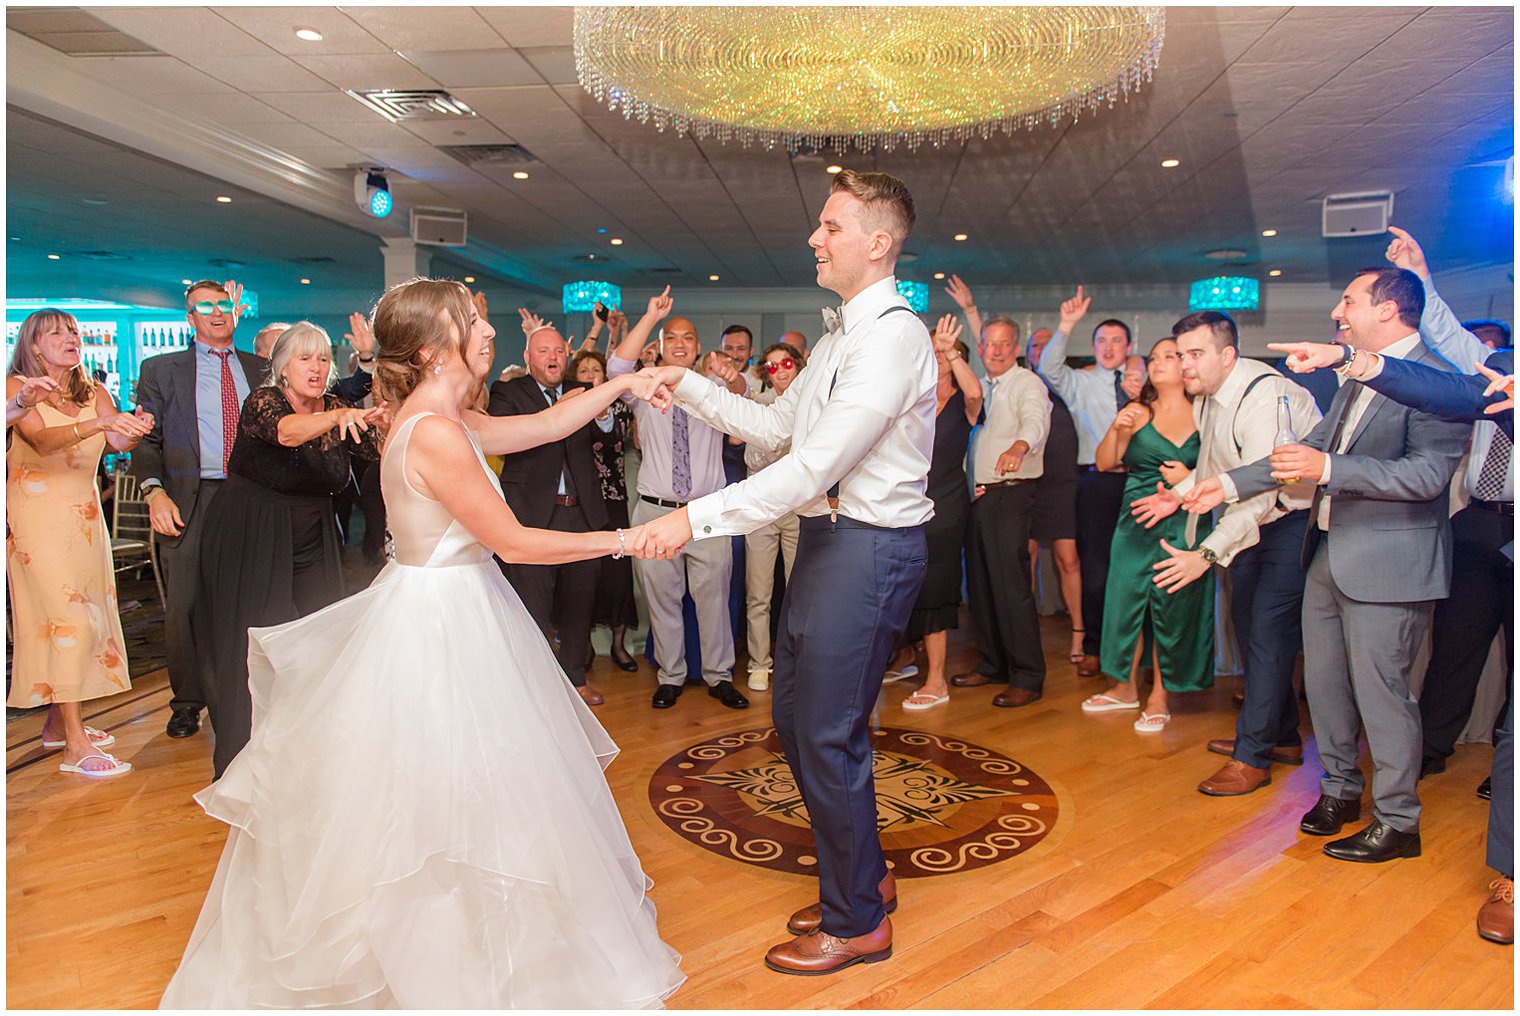 bride and groom dance in circle of wedding guests during NJ wedding reception